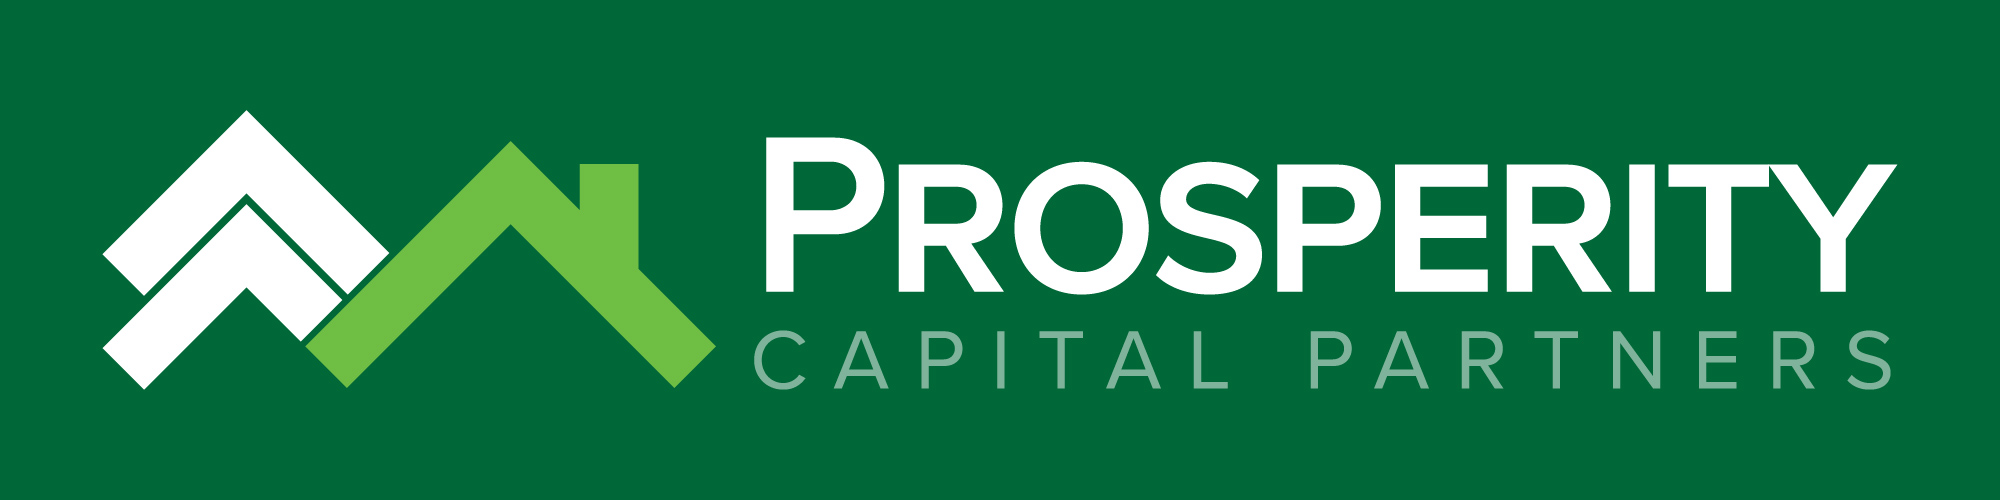 Prosperity Capital Partners, Friday, May 20, 2022, Press release picture